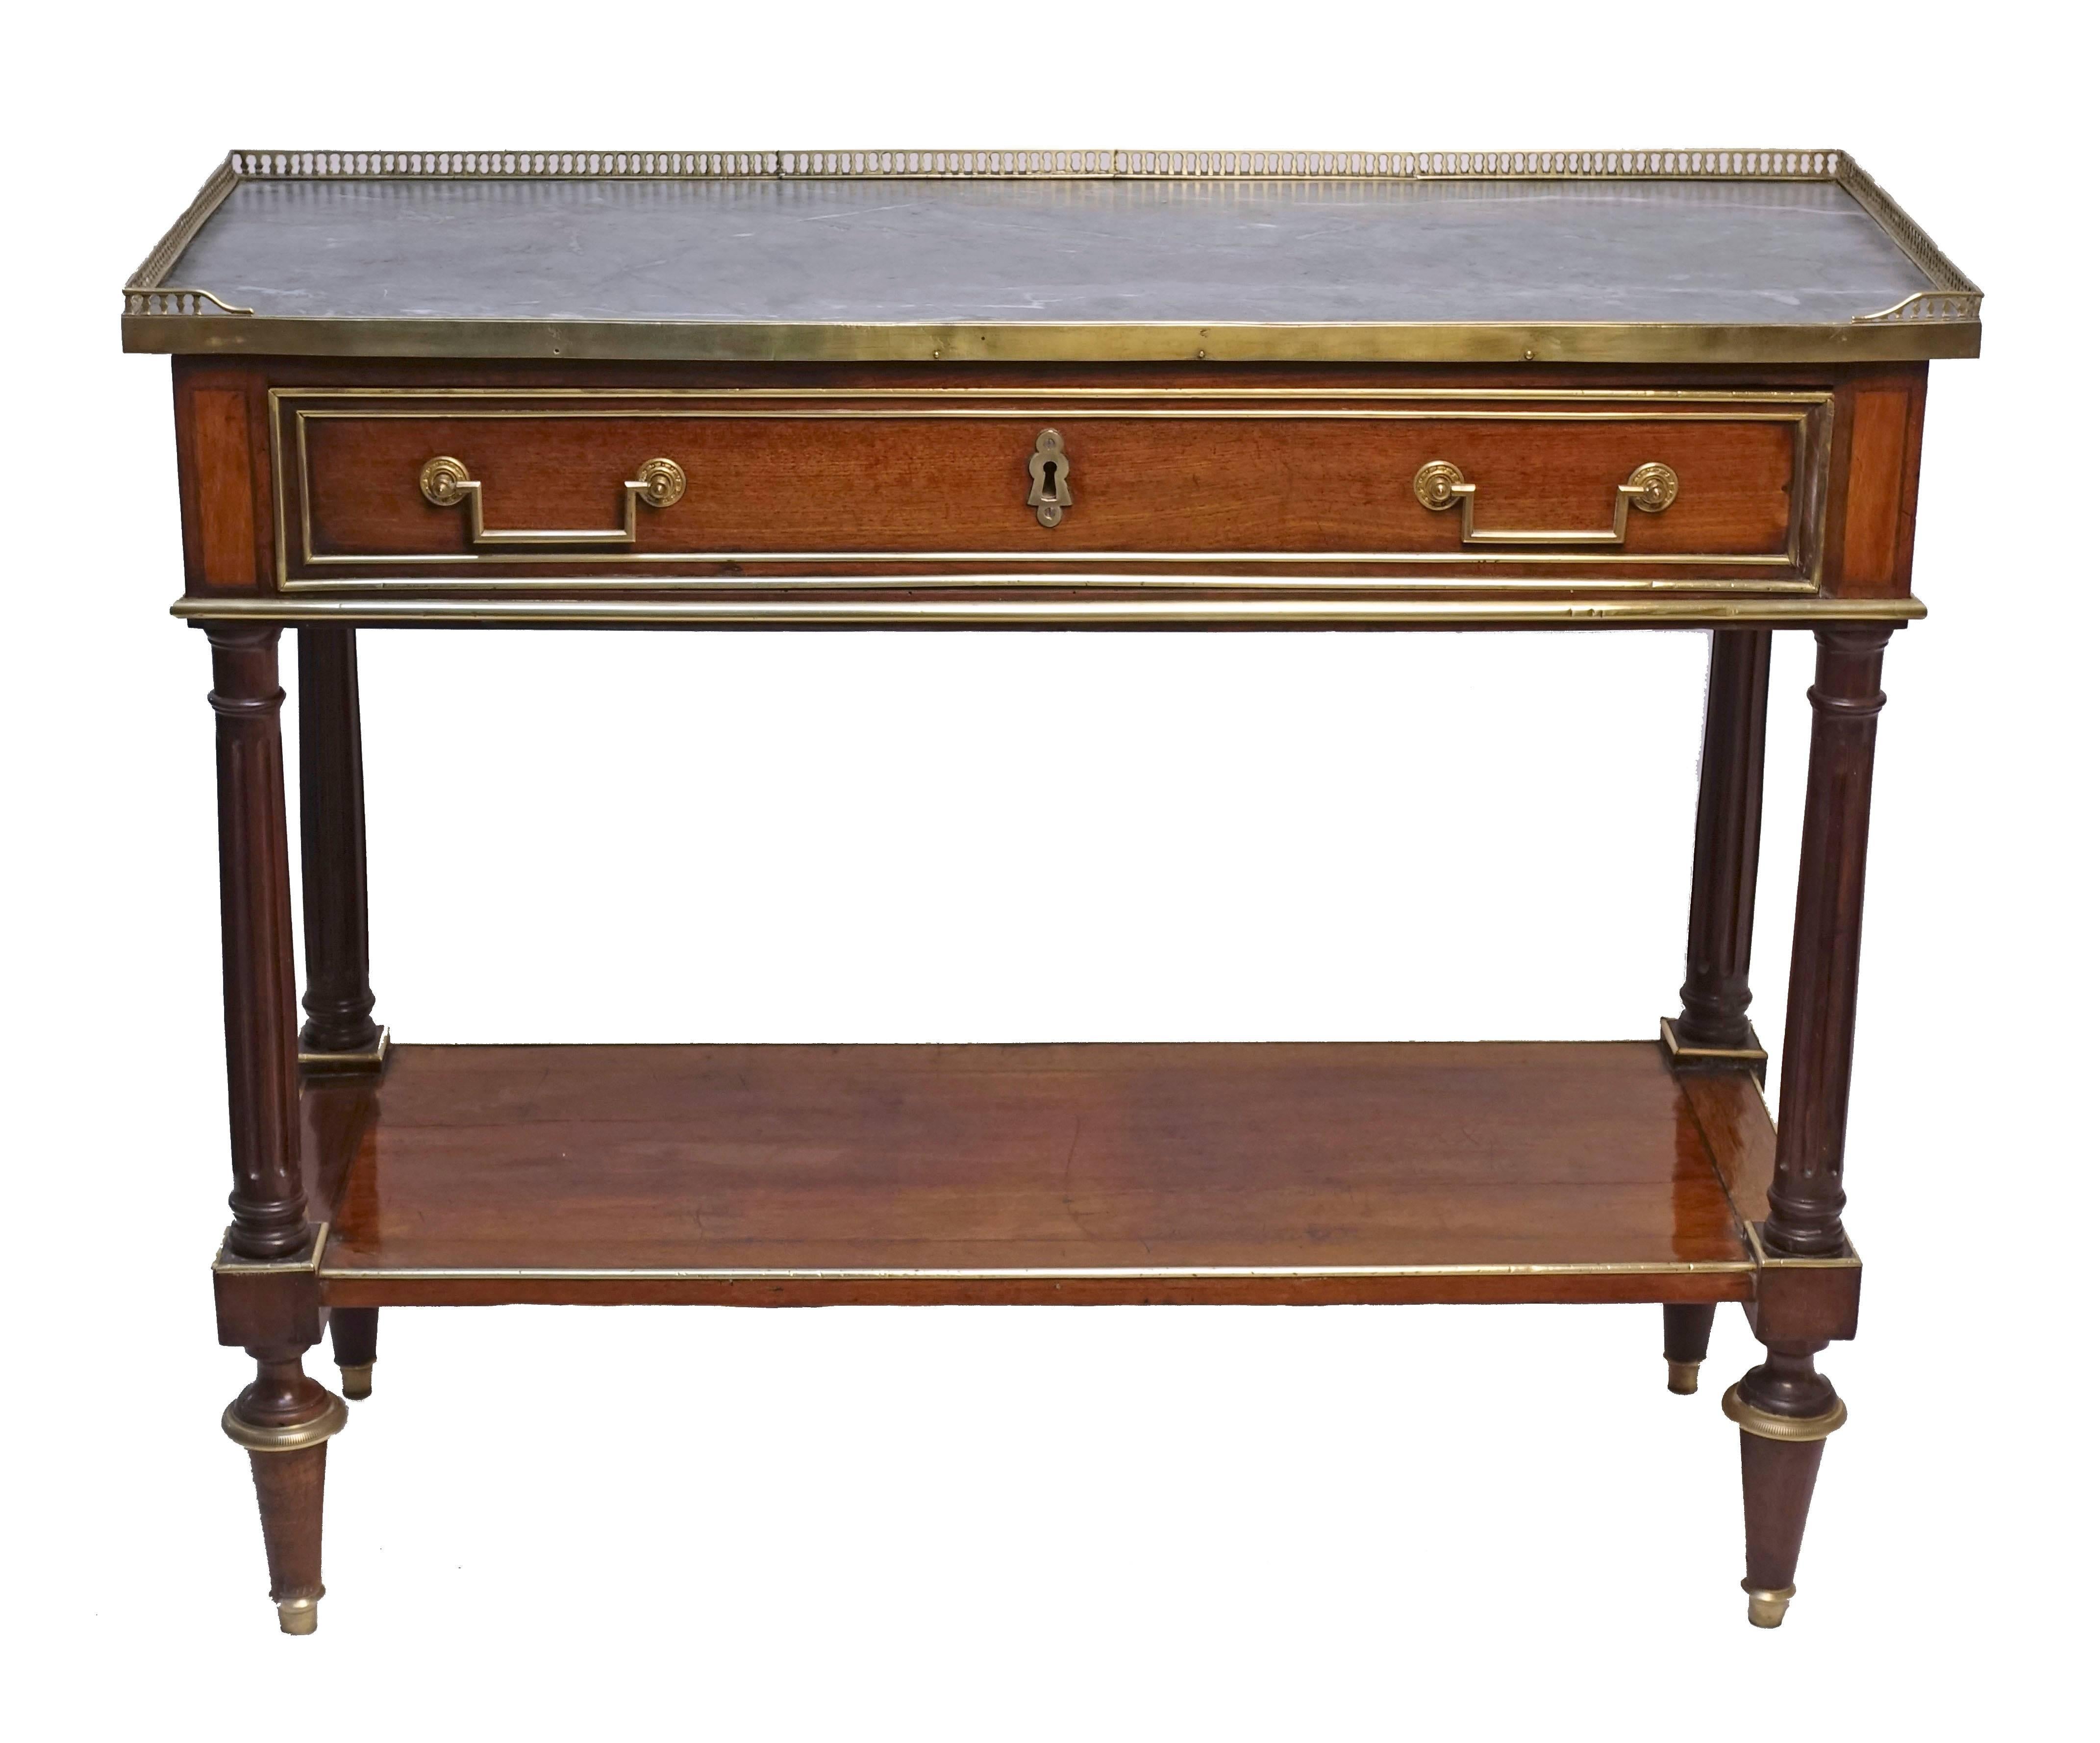 Brass-mounted Directoire period dessert table or server with brass gallery around the grey and white marble top above a single drawer. Having brass recessed panels and four fluted columns connecting to a lower shelf, standing on brass adorned toupe